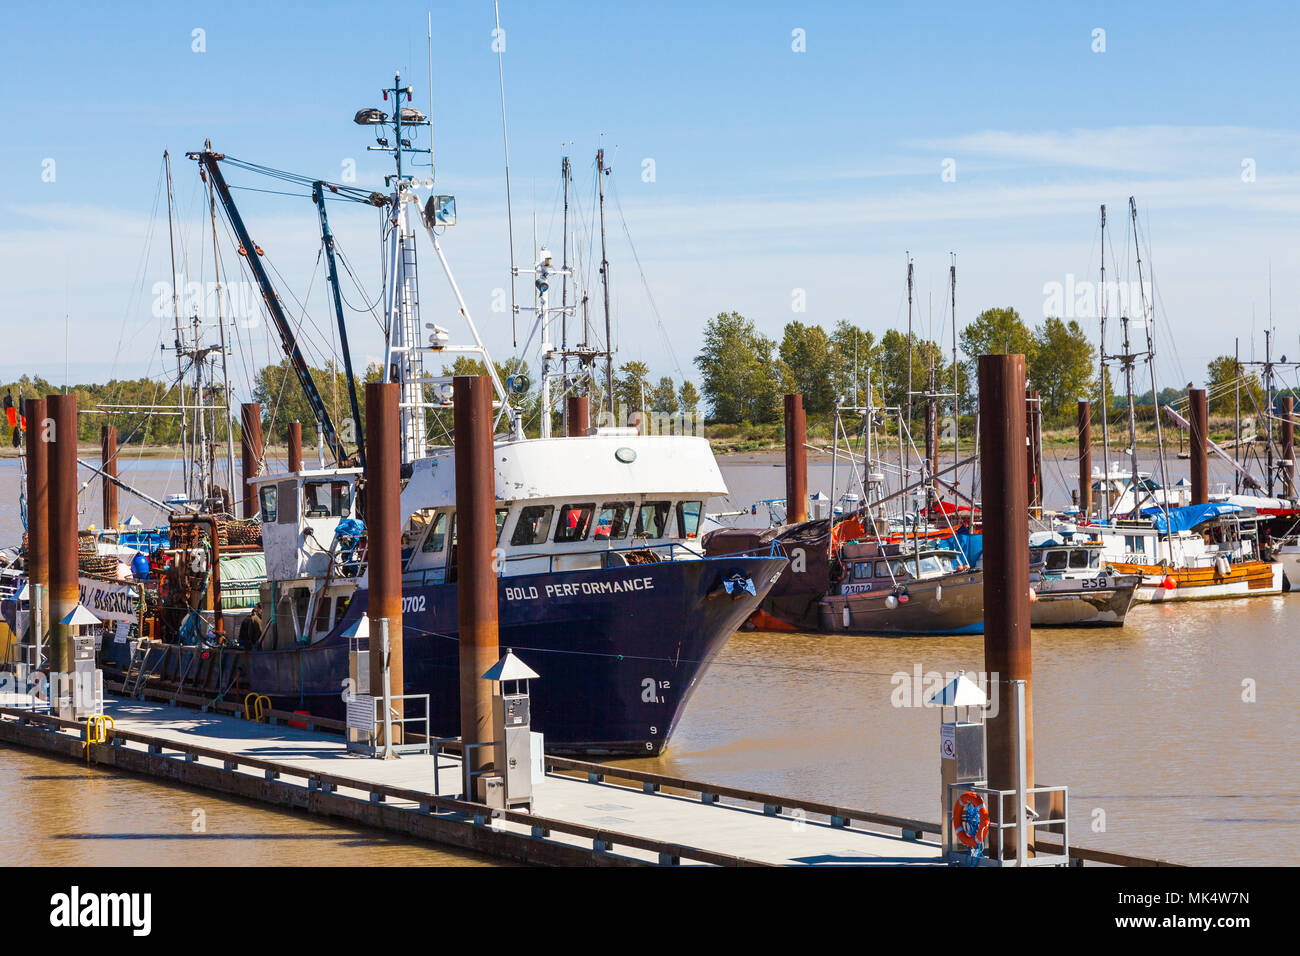 Commercial fishing boats tied up at the public fish market in Steveston, British Columbia, Canada Stock Photo